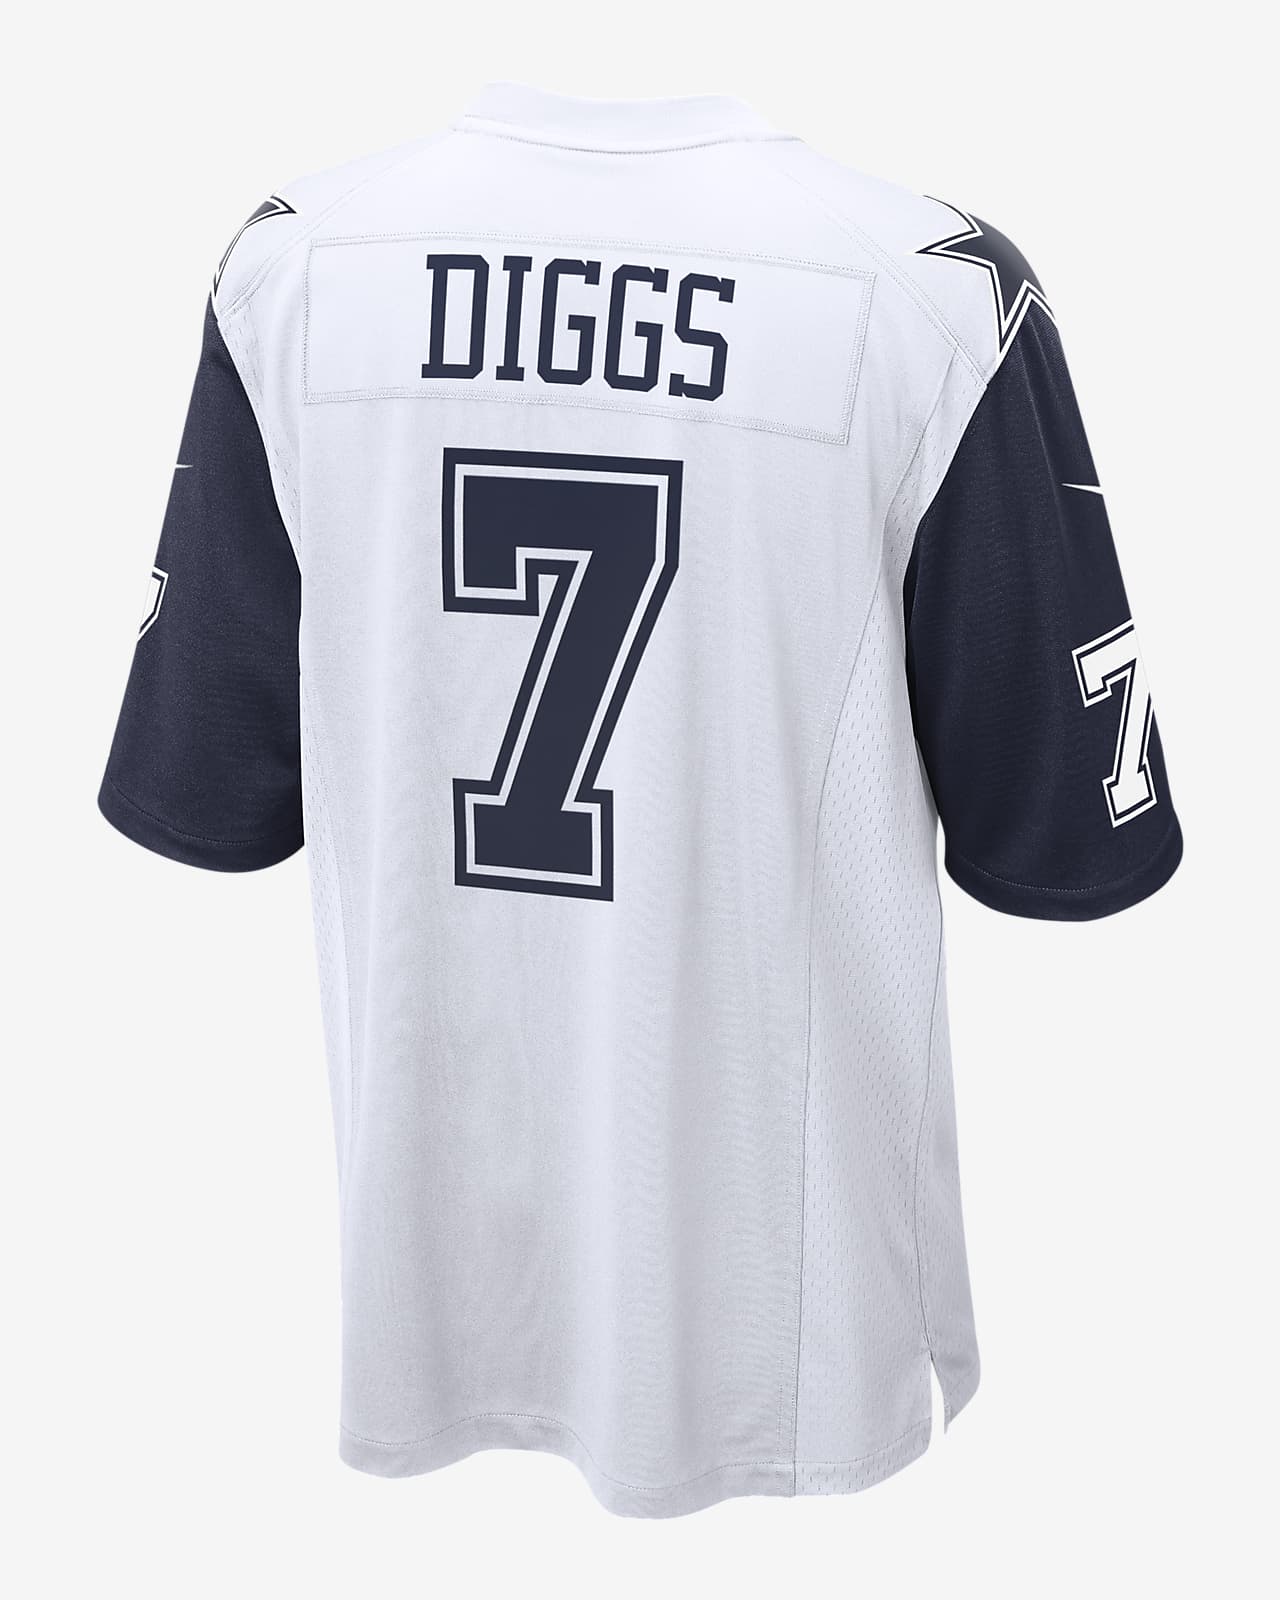 dallas cowboys jersey numbers